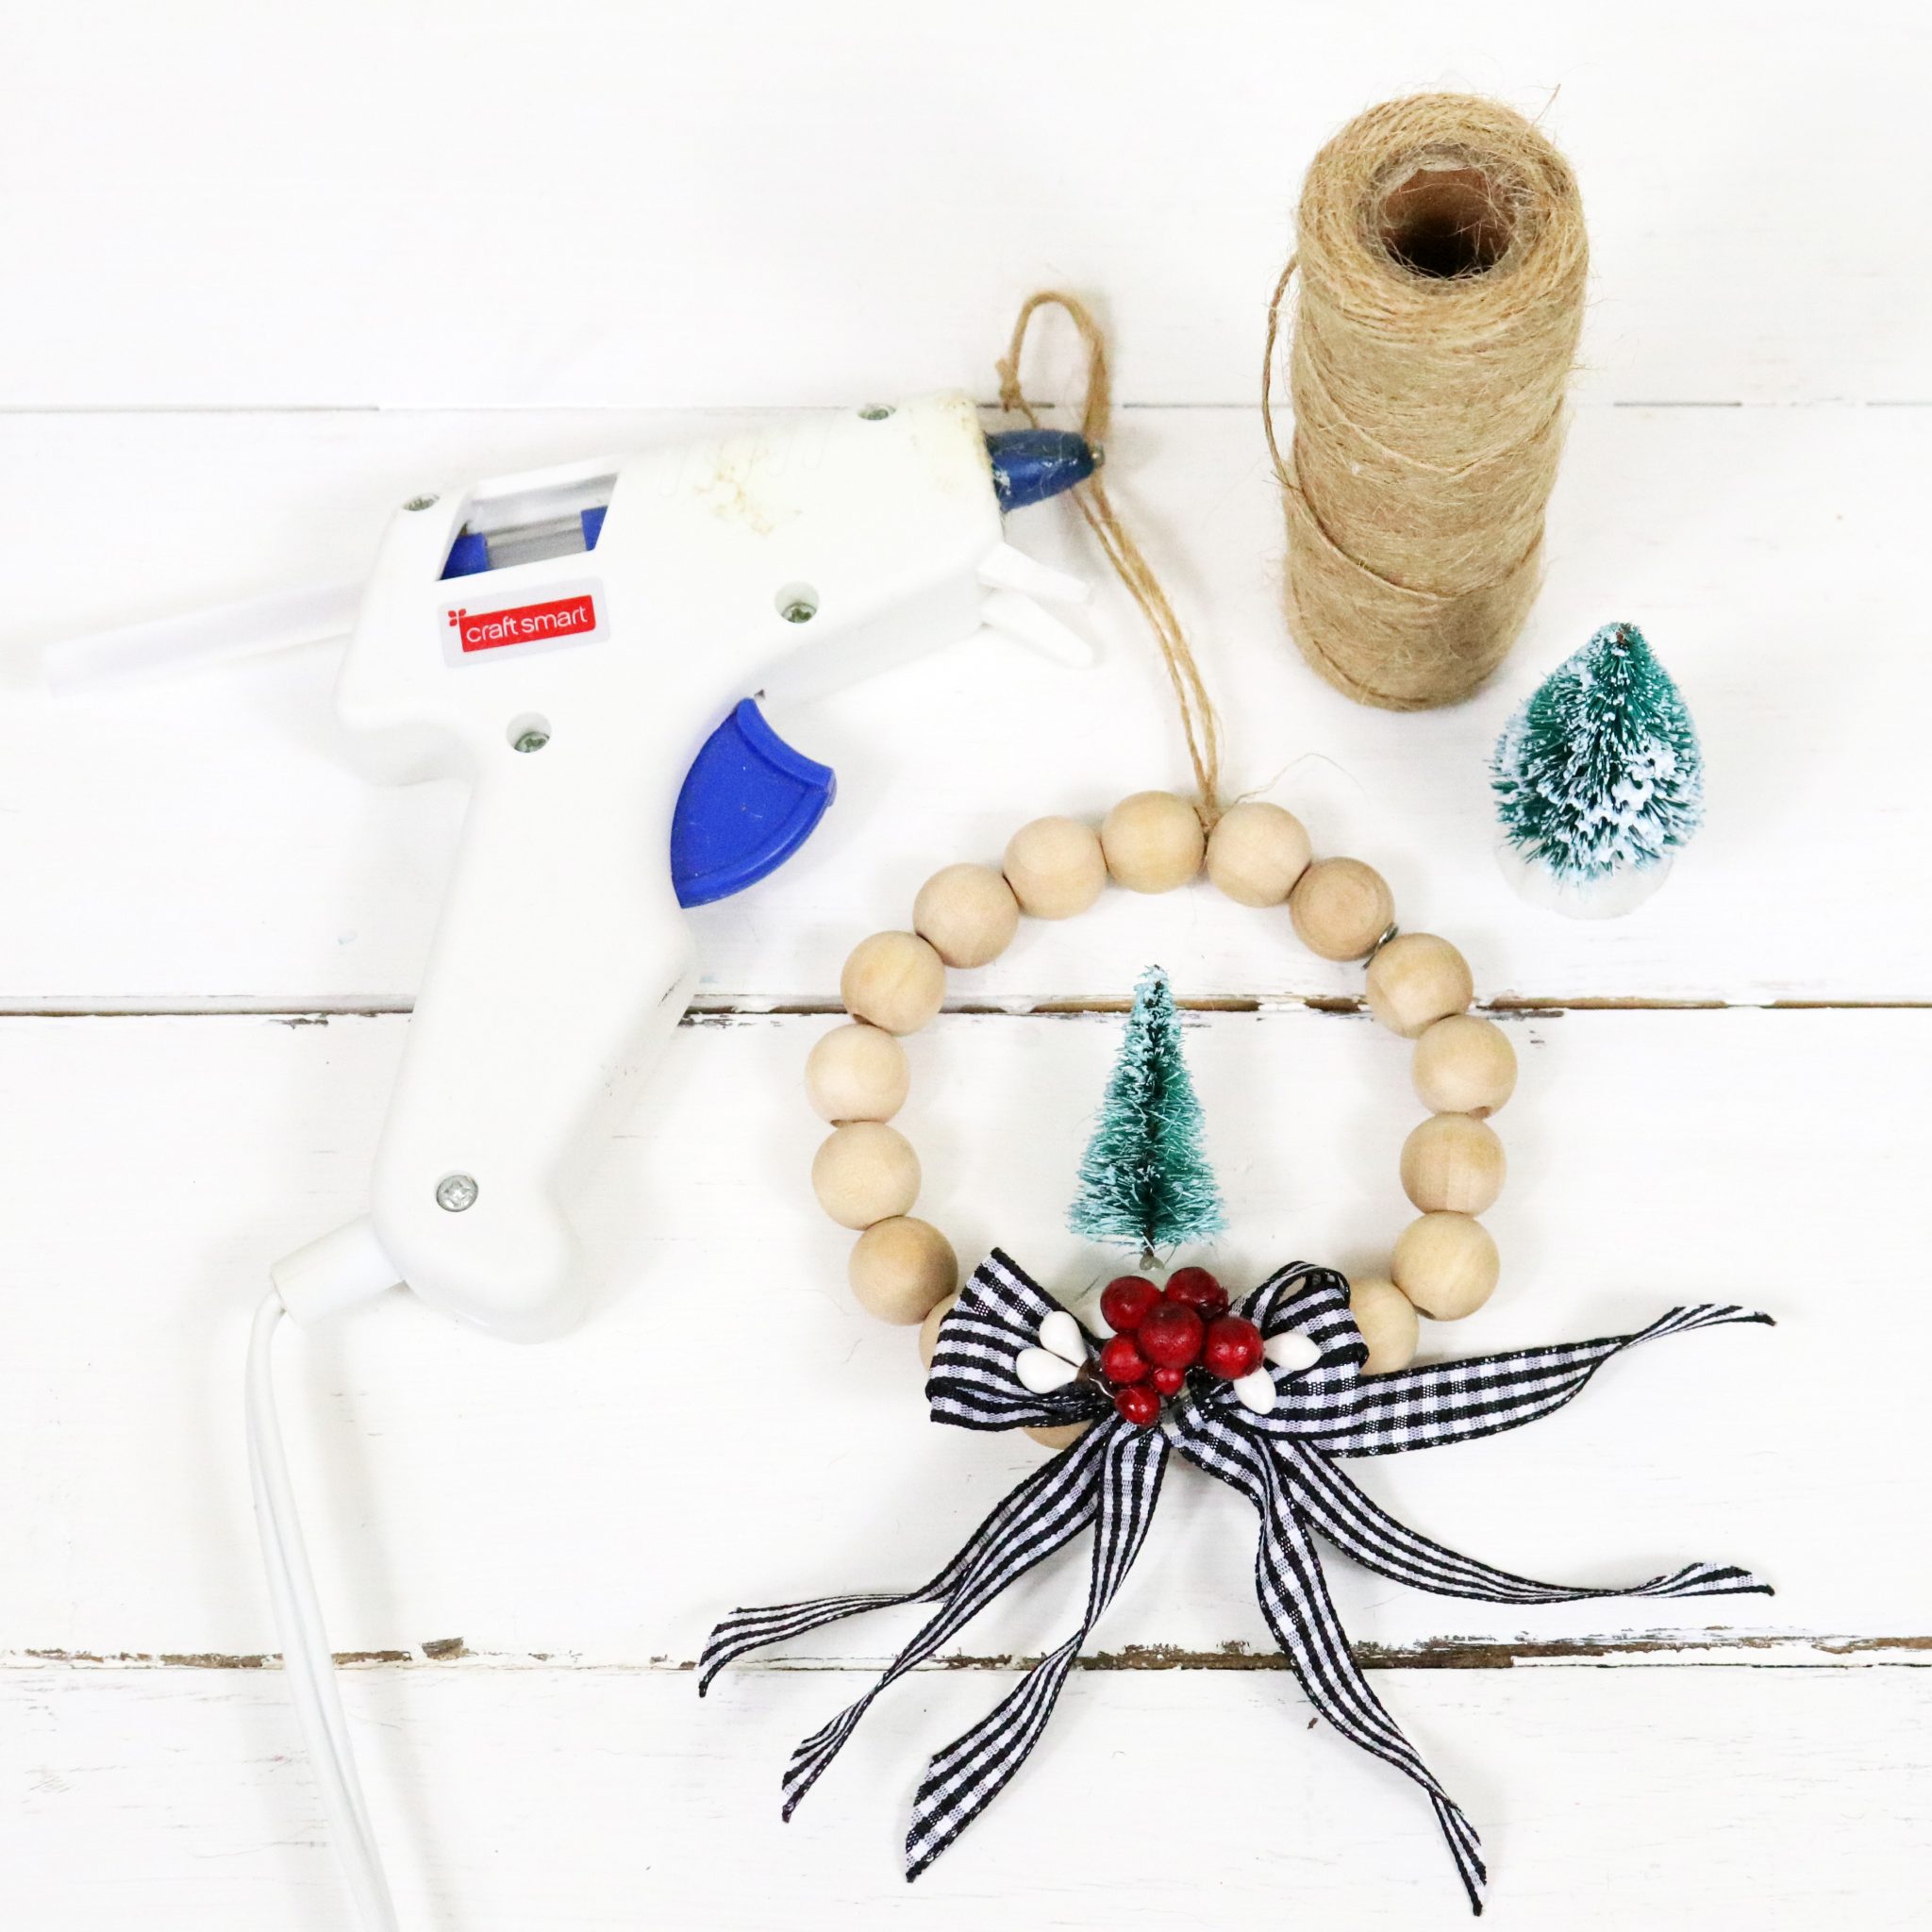 It's time for another Quick and Easy DIY Craft, today we are featuring DIY Farmhouse Wood Bead Wreath Ornaments that will look wonderful on your tree and perfect on your packages!